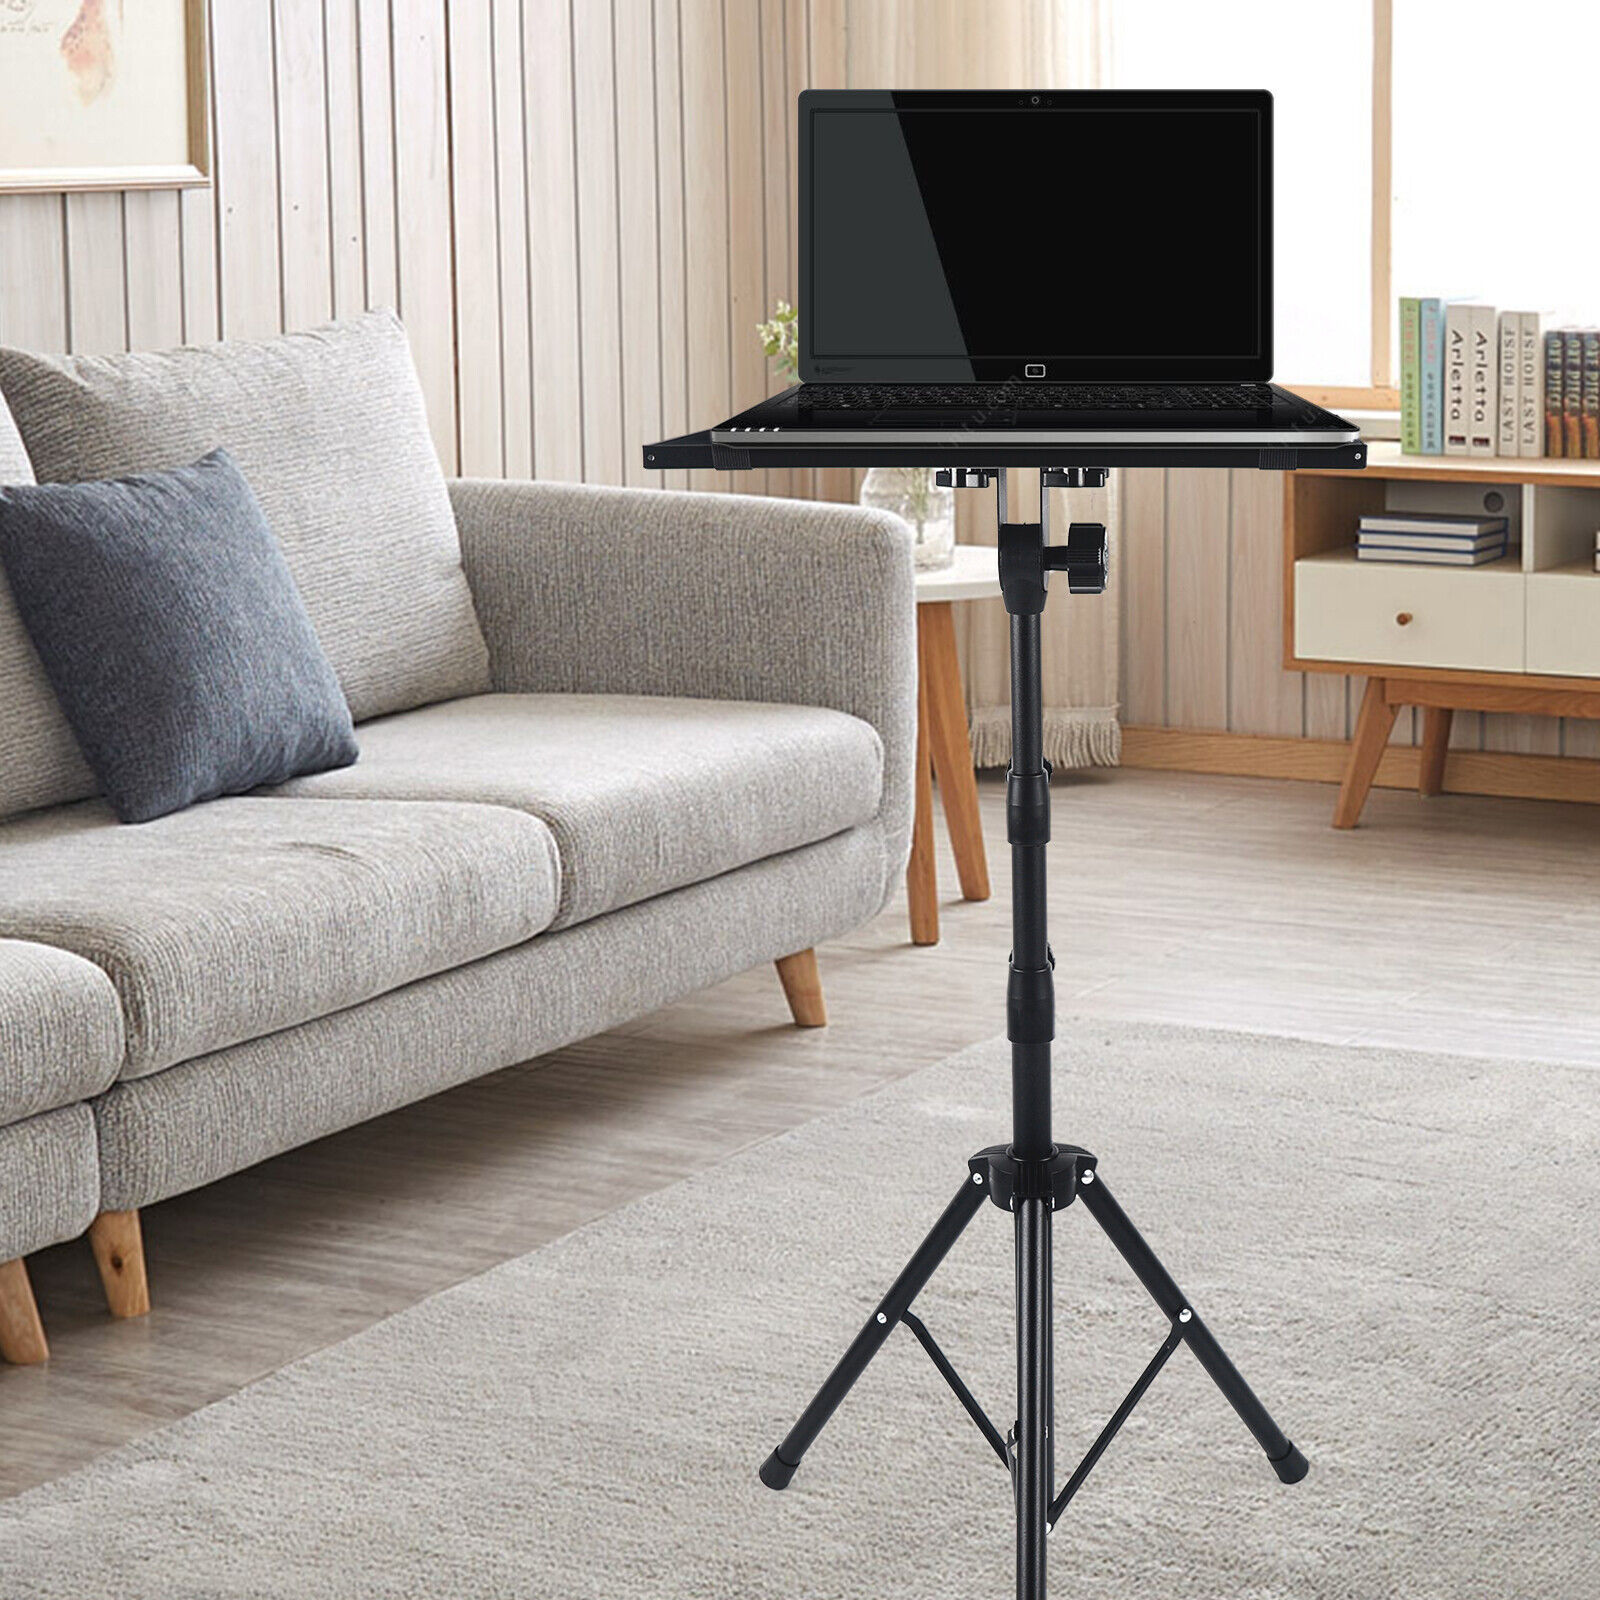 Adjustable Height Bracket Laptop Projector Tripod Stand Table With Tray Black